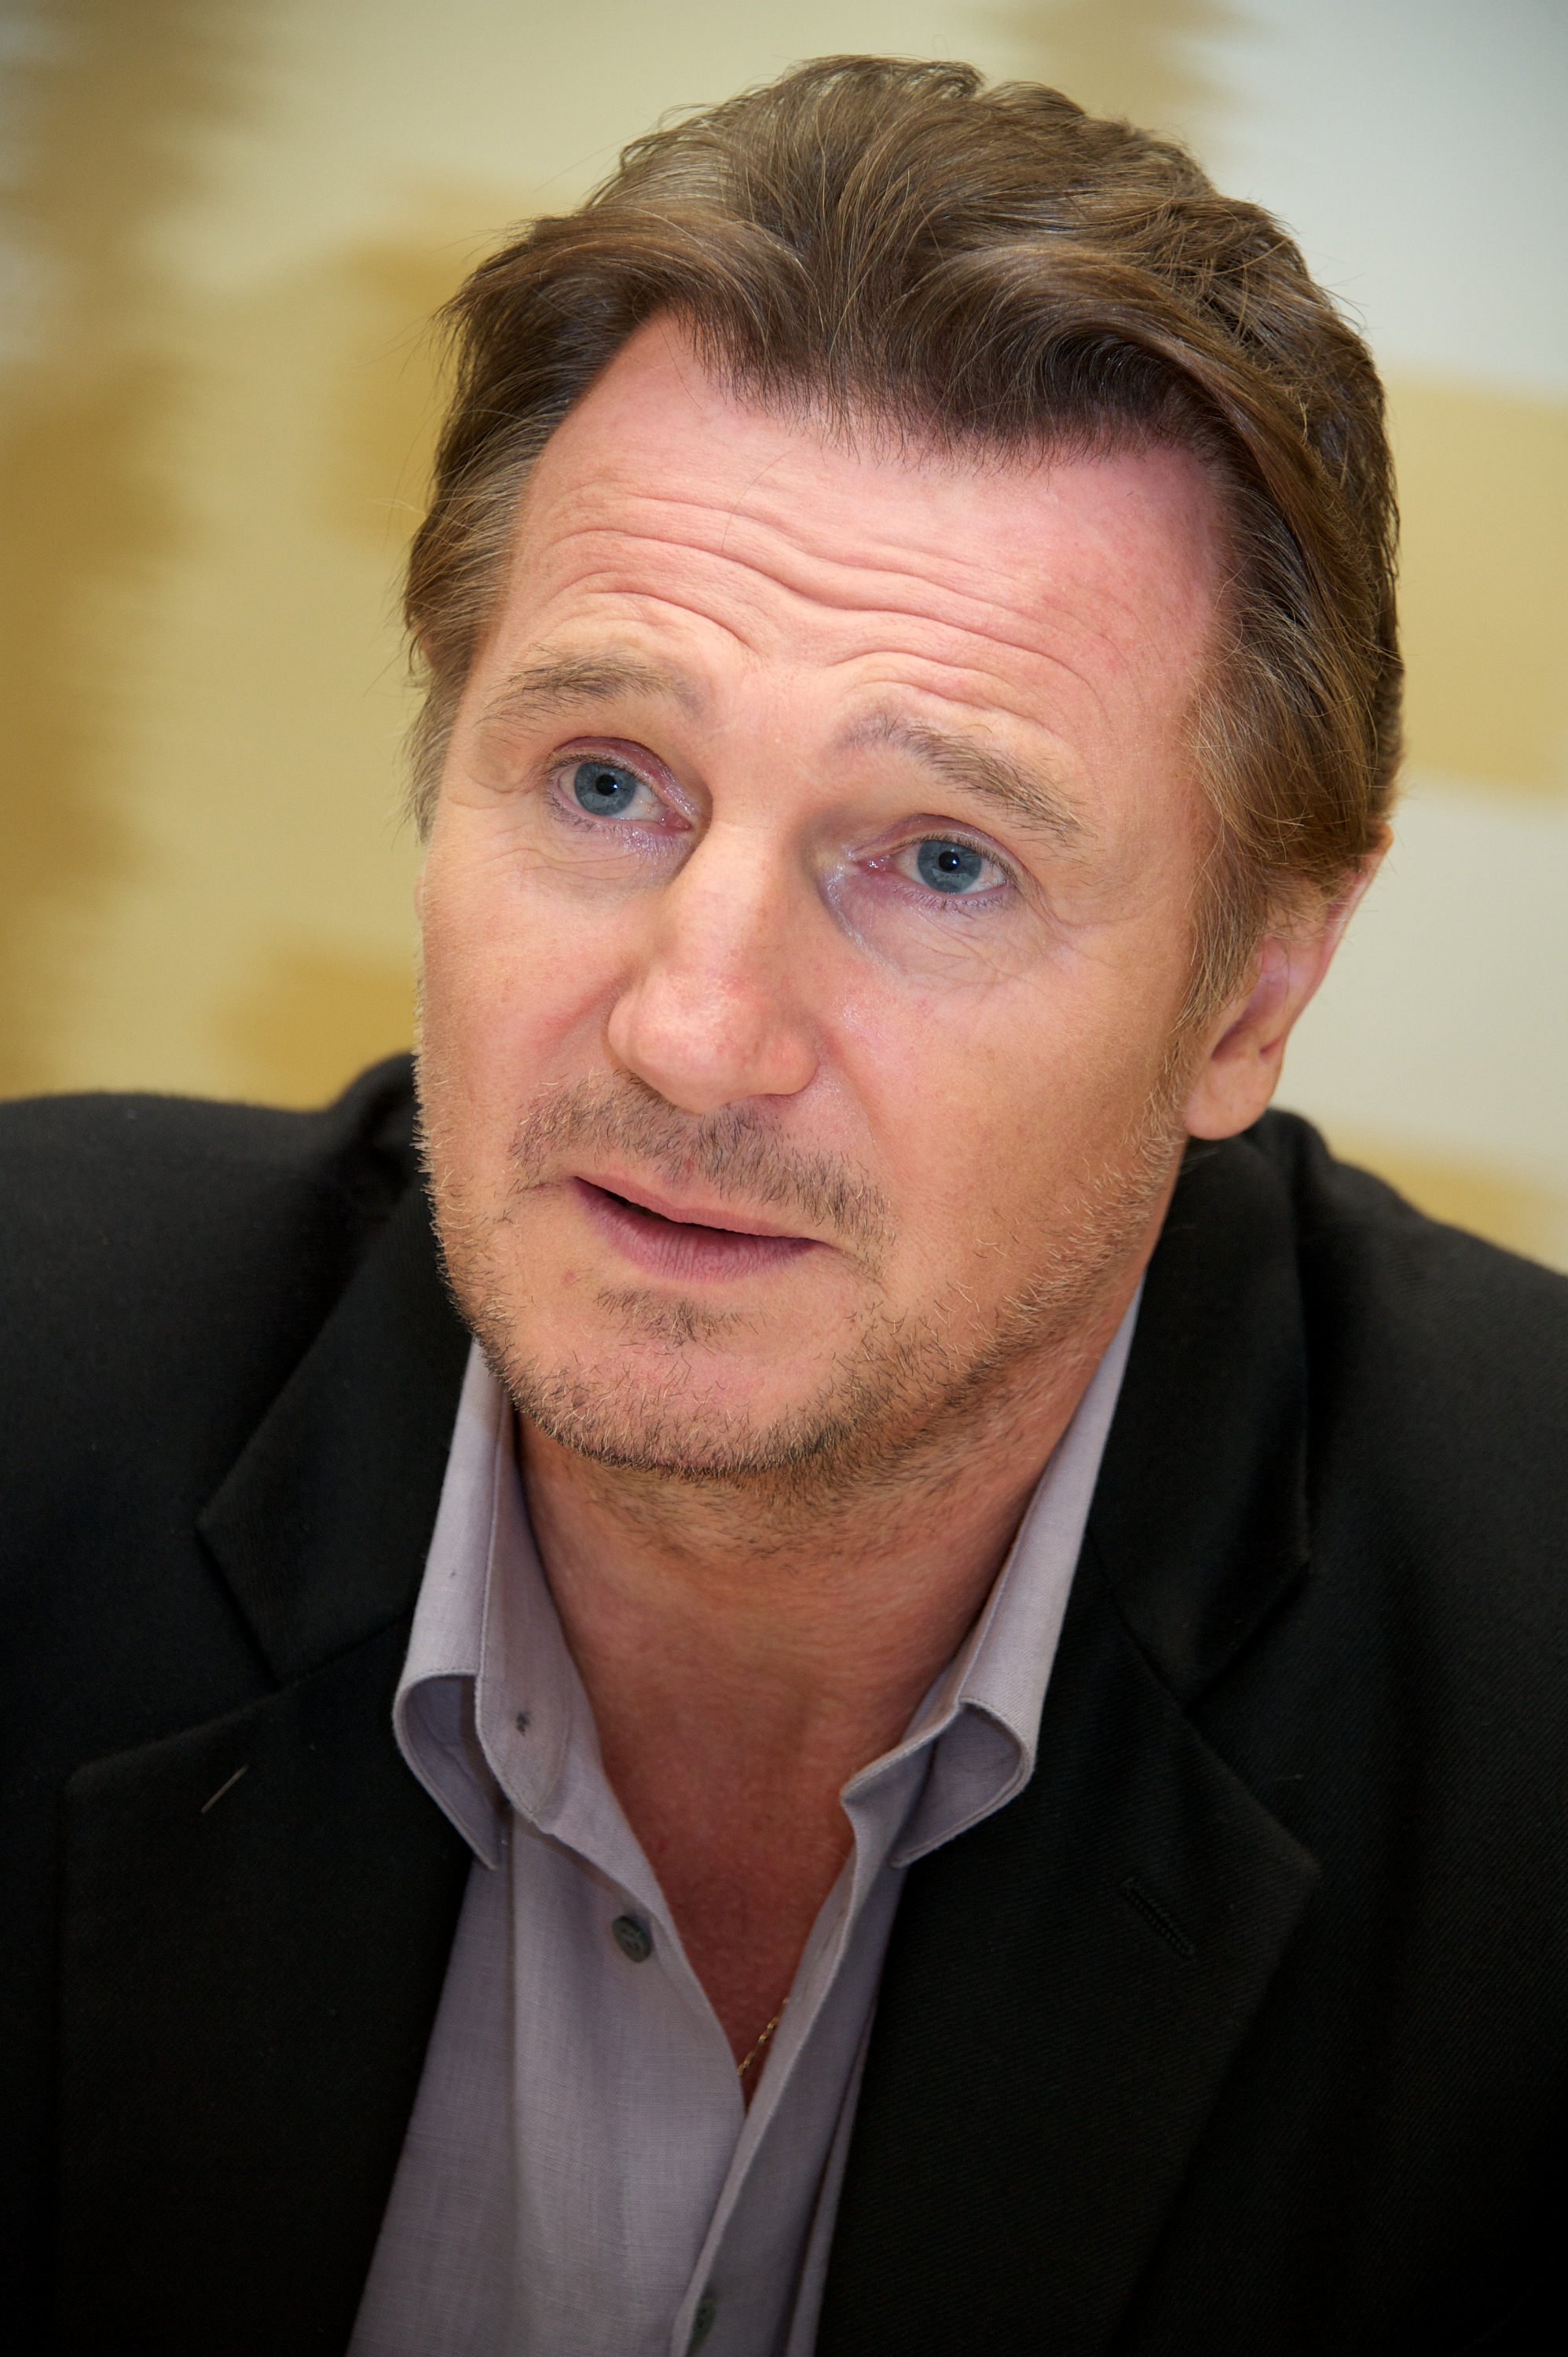 Liam Neeson on September 23, 2012 in New York City | Source: Getty Images